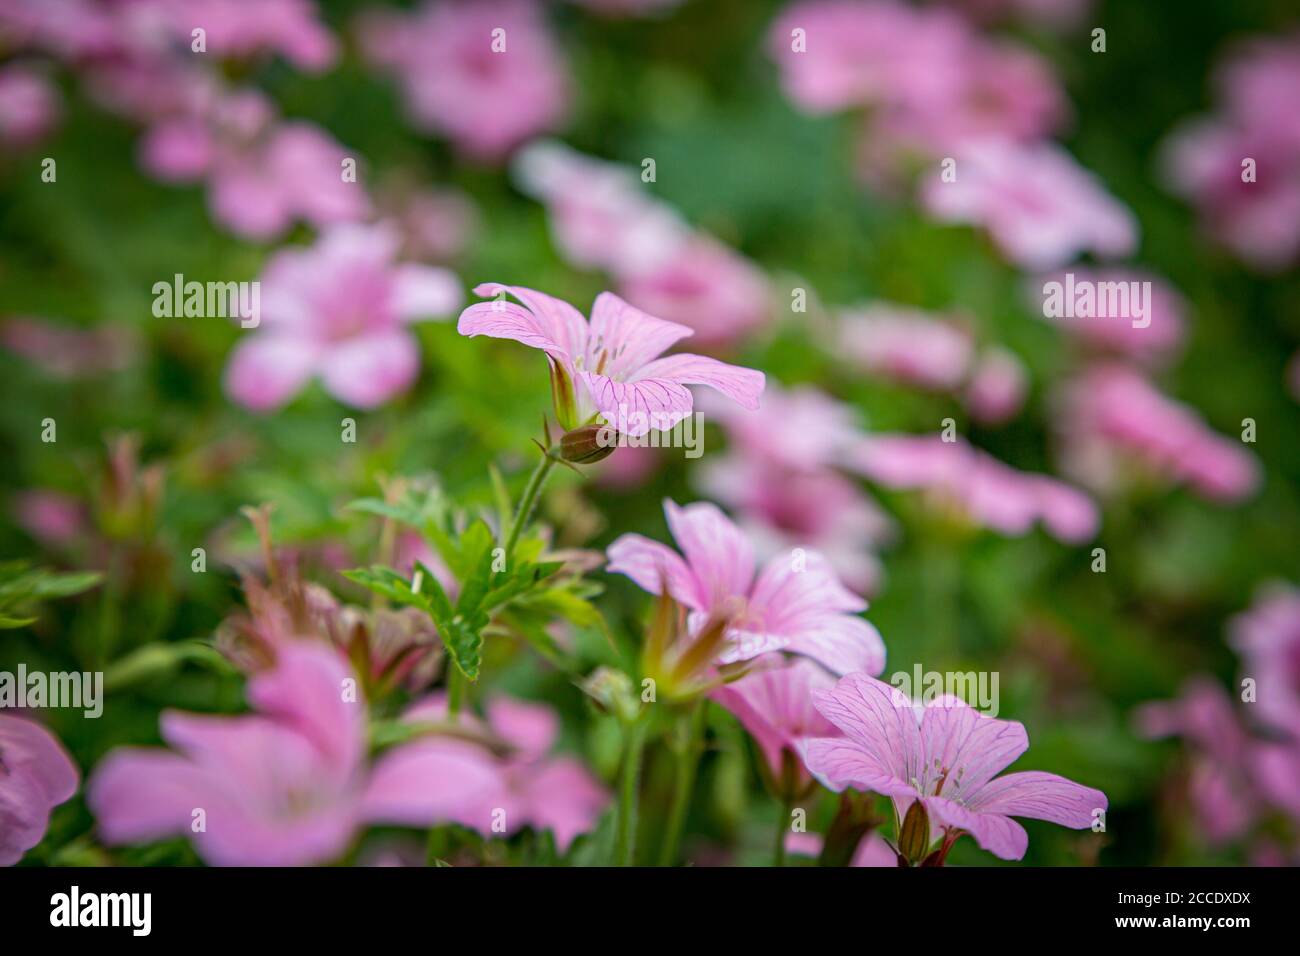 A full frame photograph of pink geranium nodosum flowers, with a shallow depth of field Stock Photo